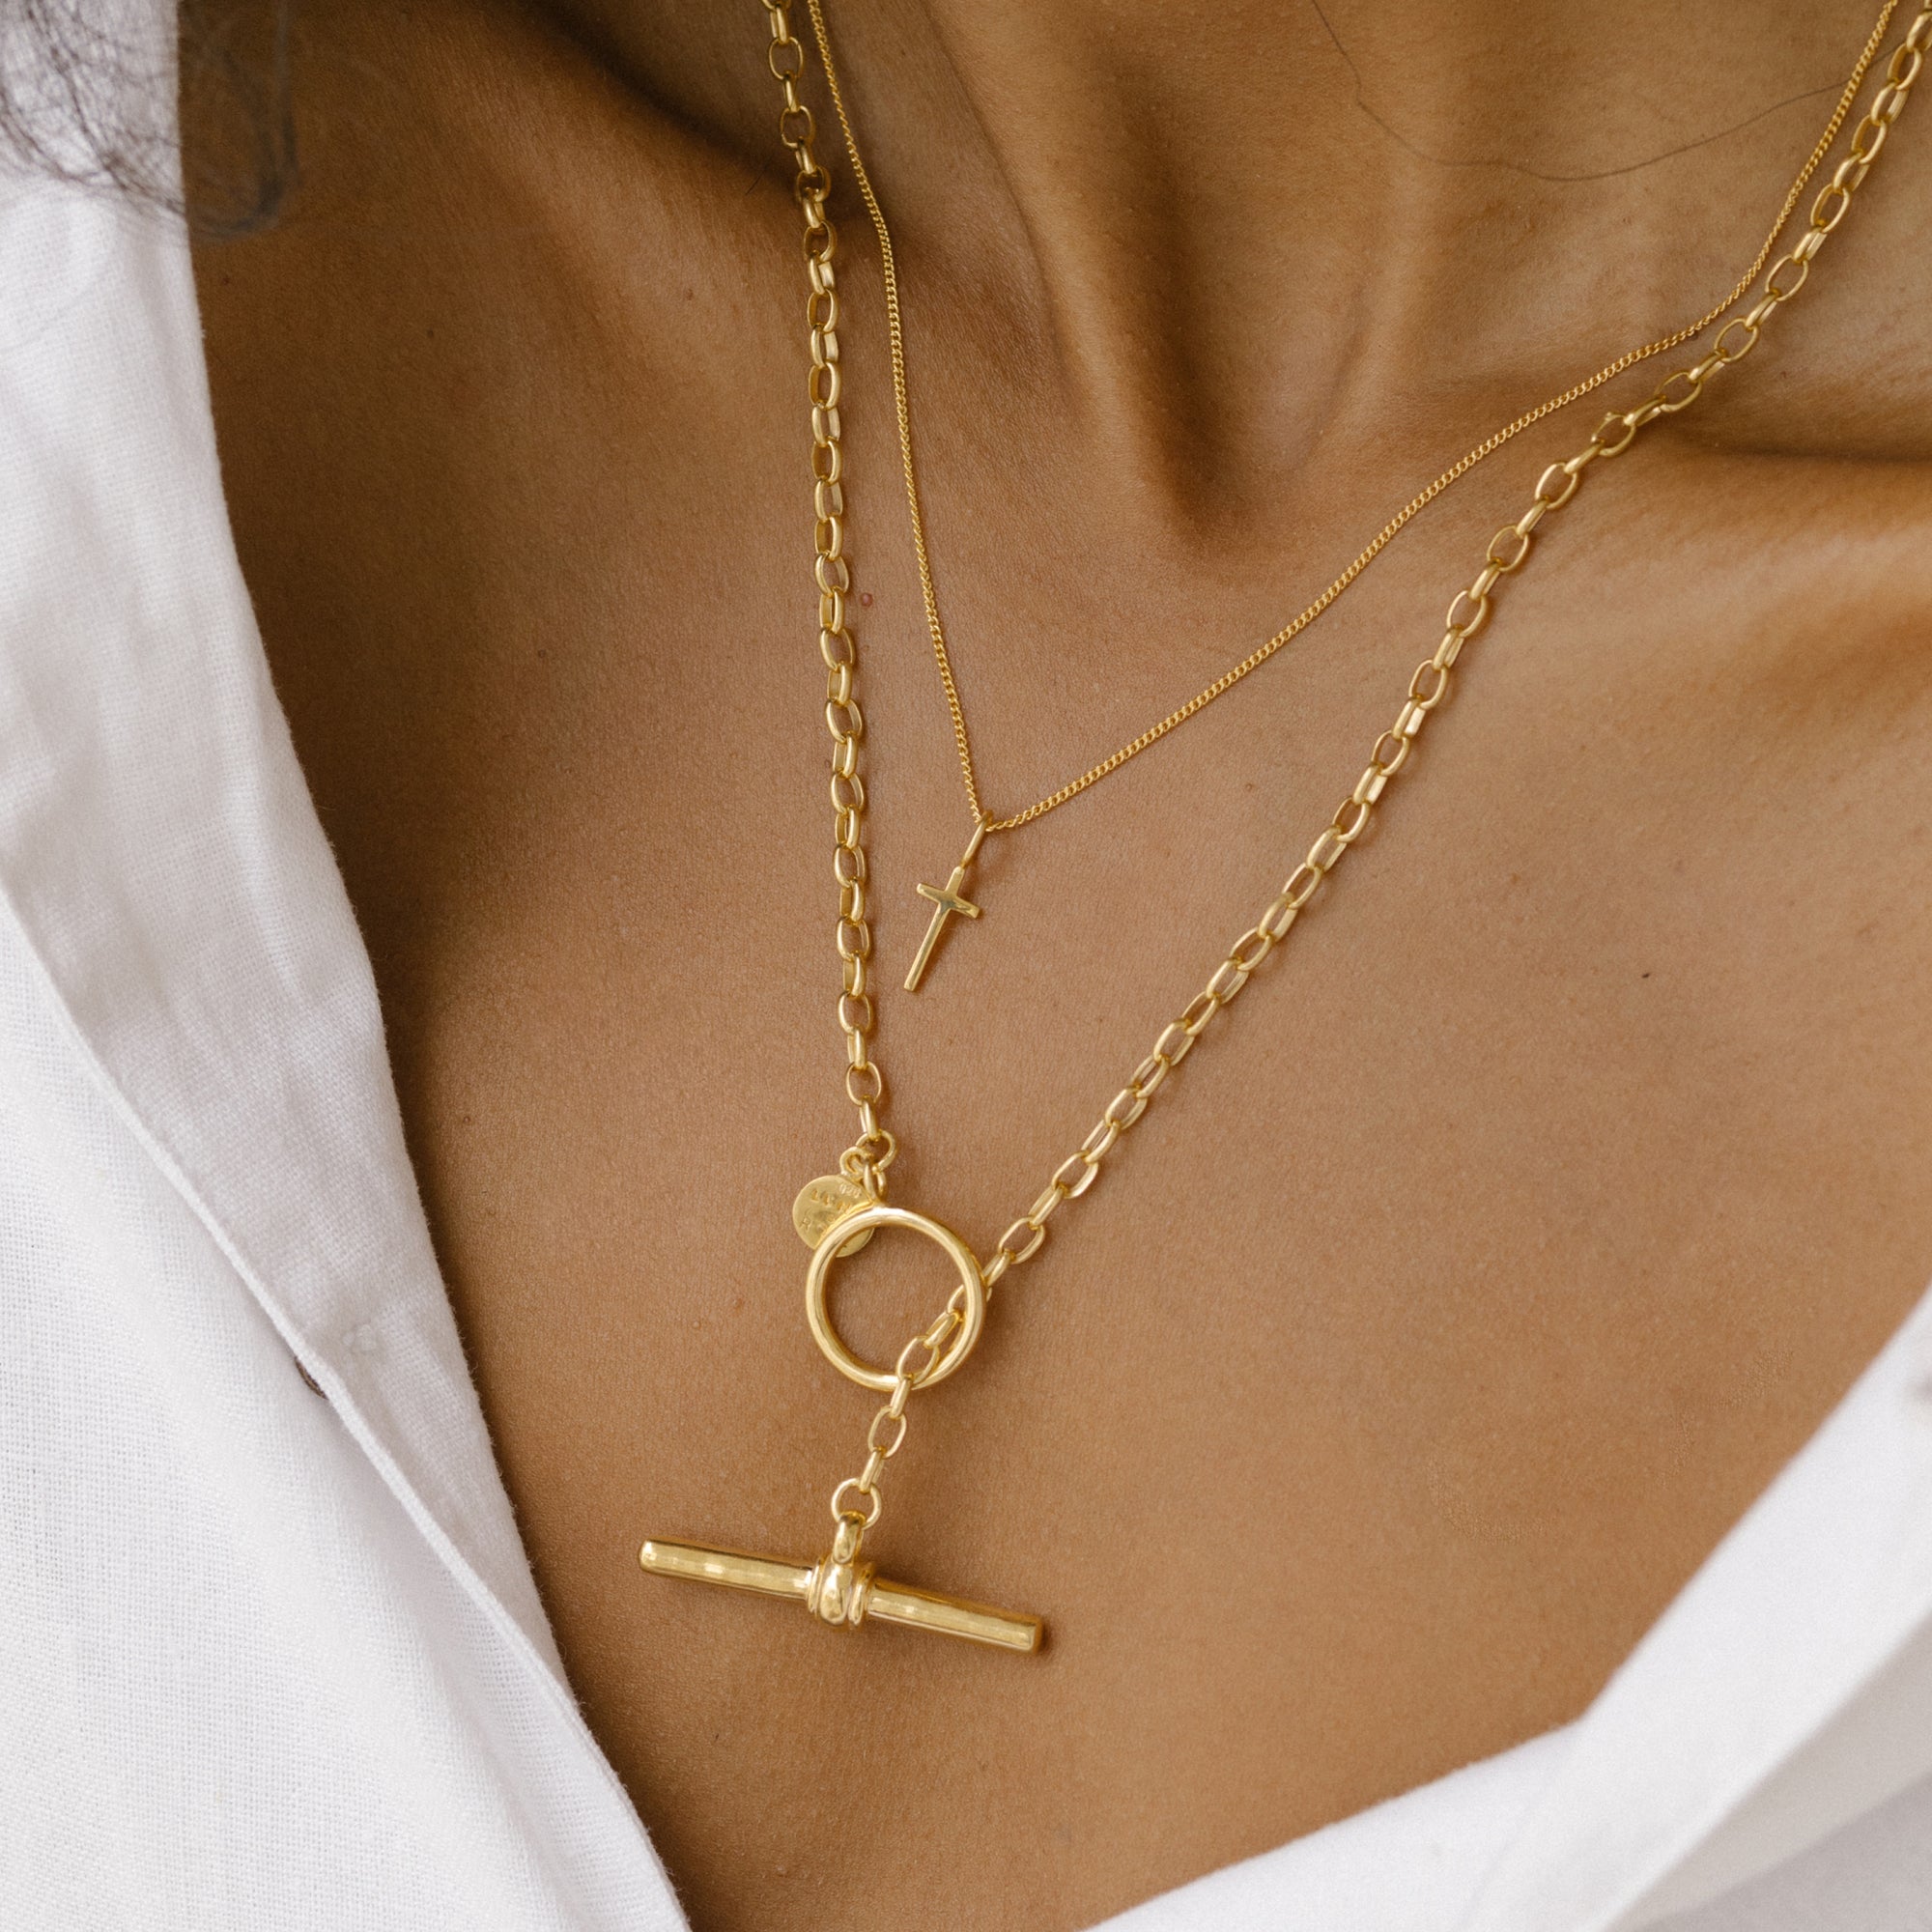 Sustainable Jewellery made from Recycled Silver Cher FOB Chain Necklace - Gold